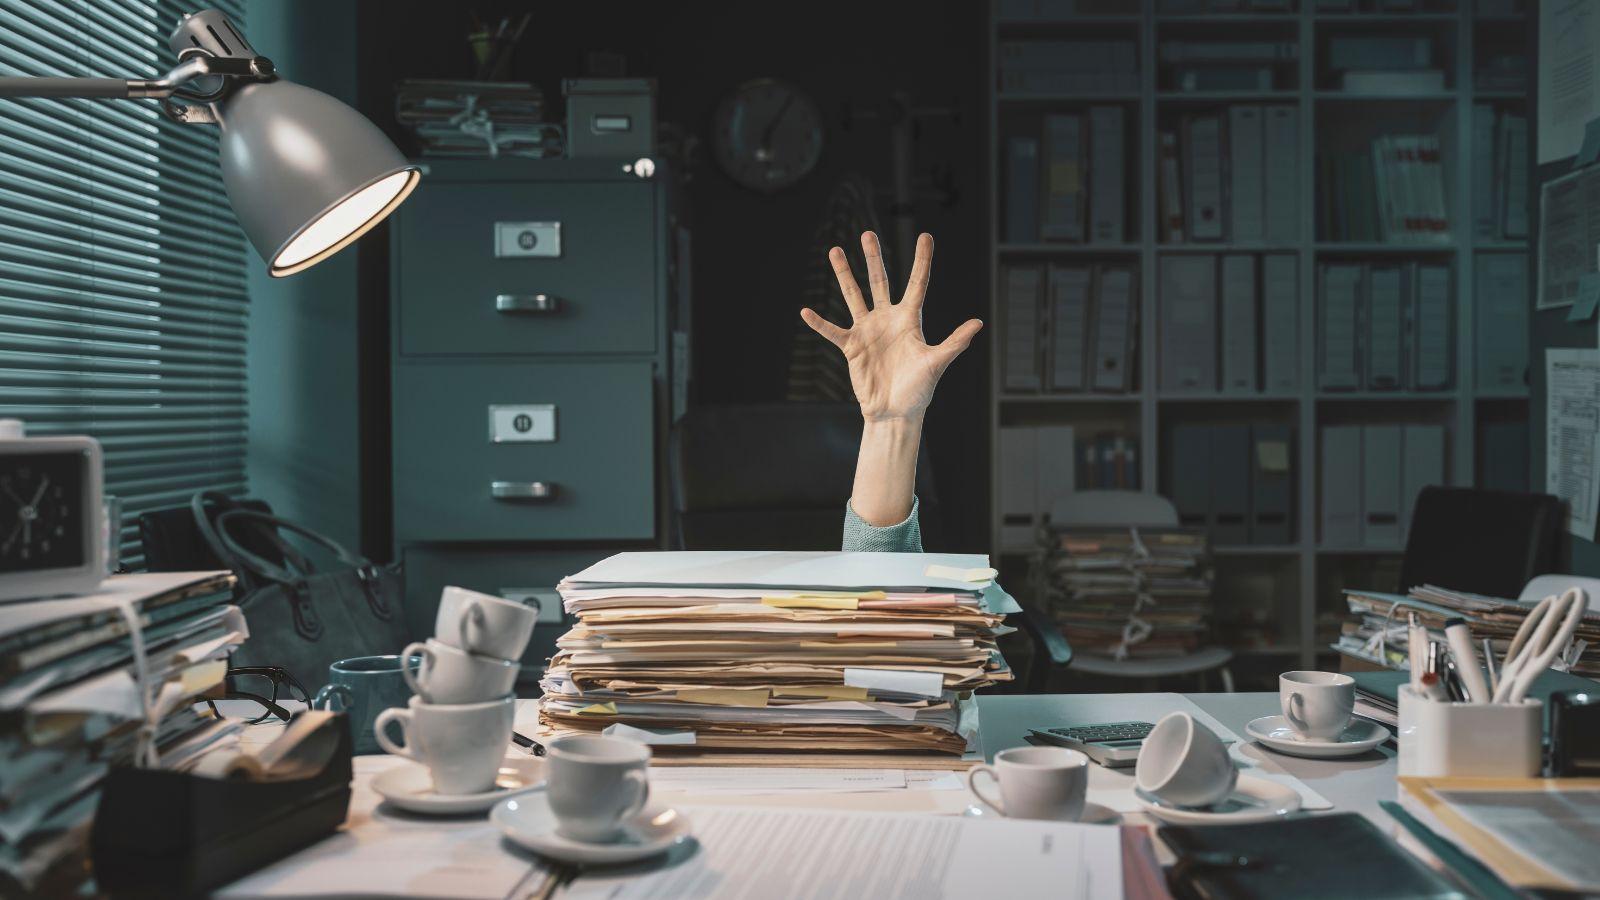 overcome stress. Image of a pile of paperwork on a desk with a hand waving for help